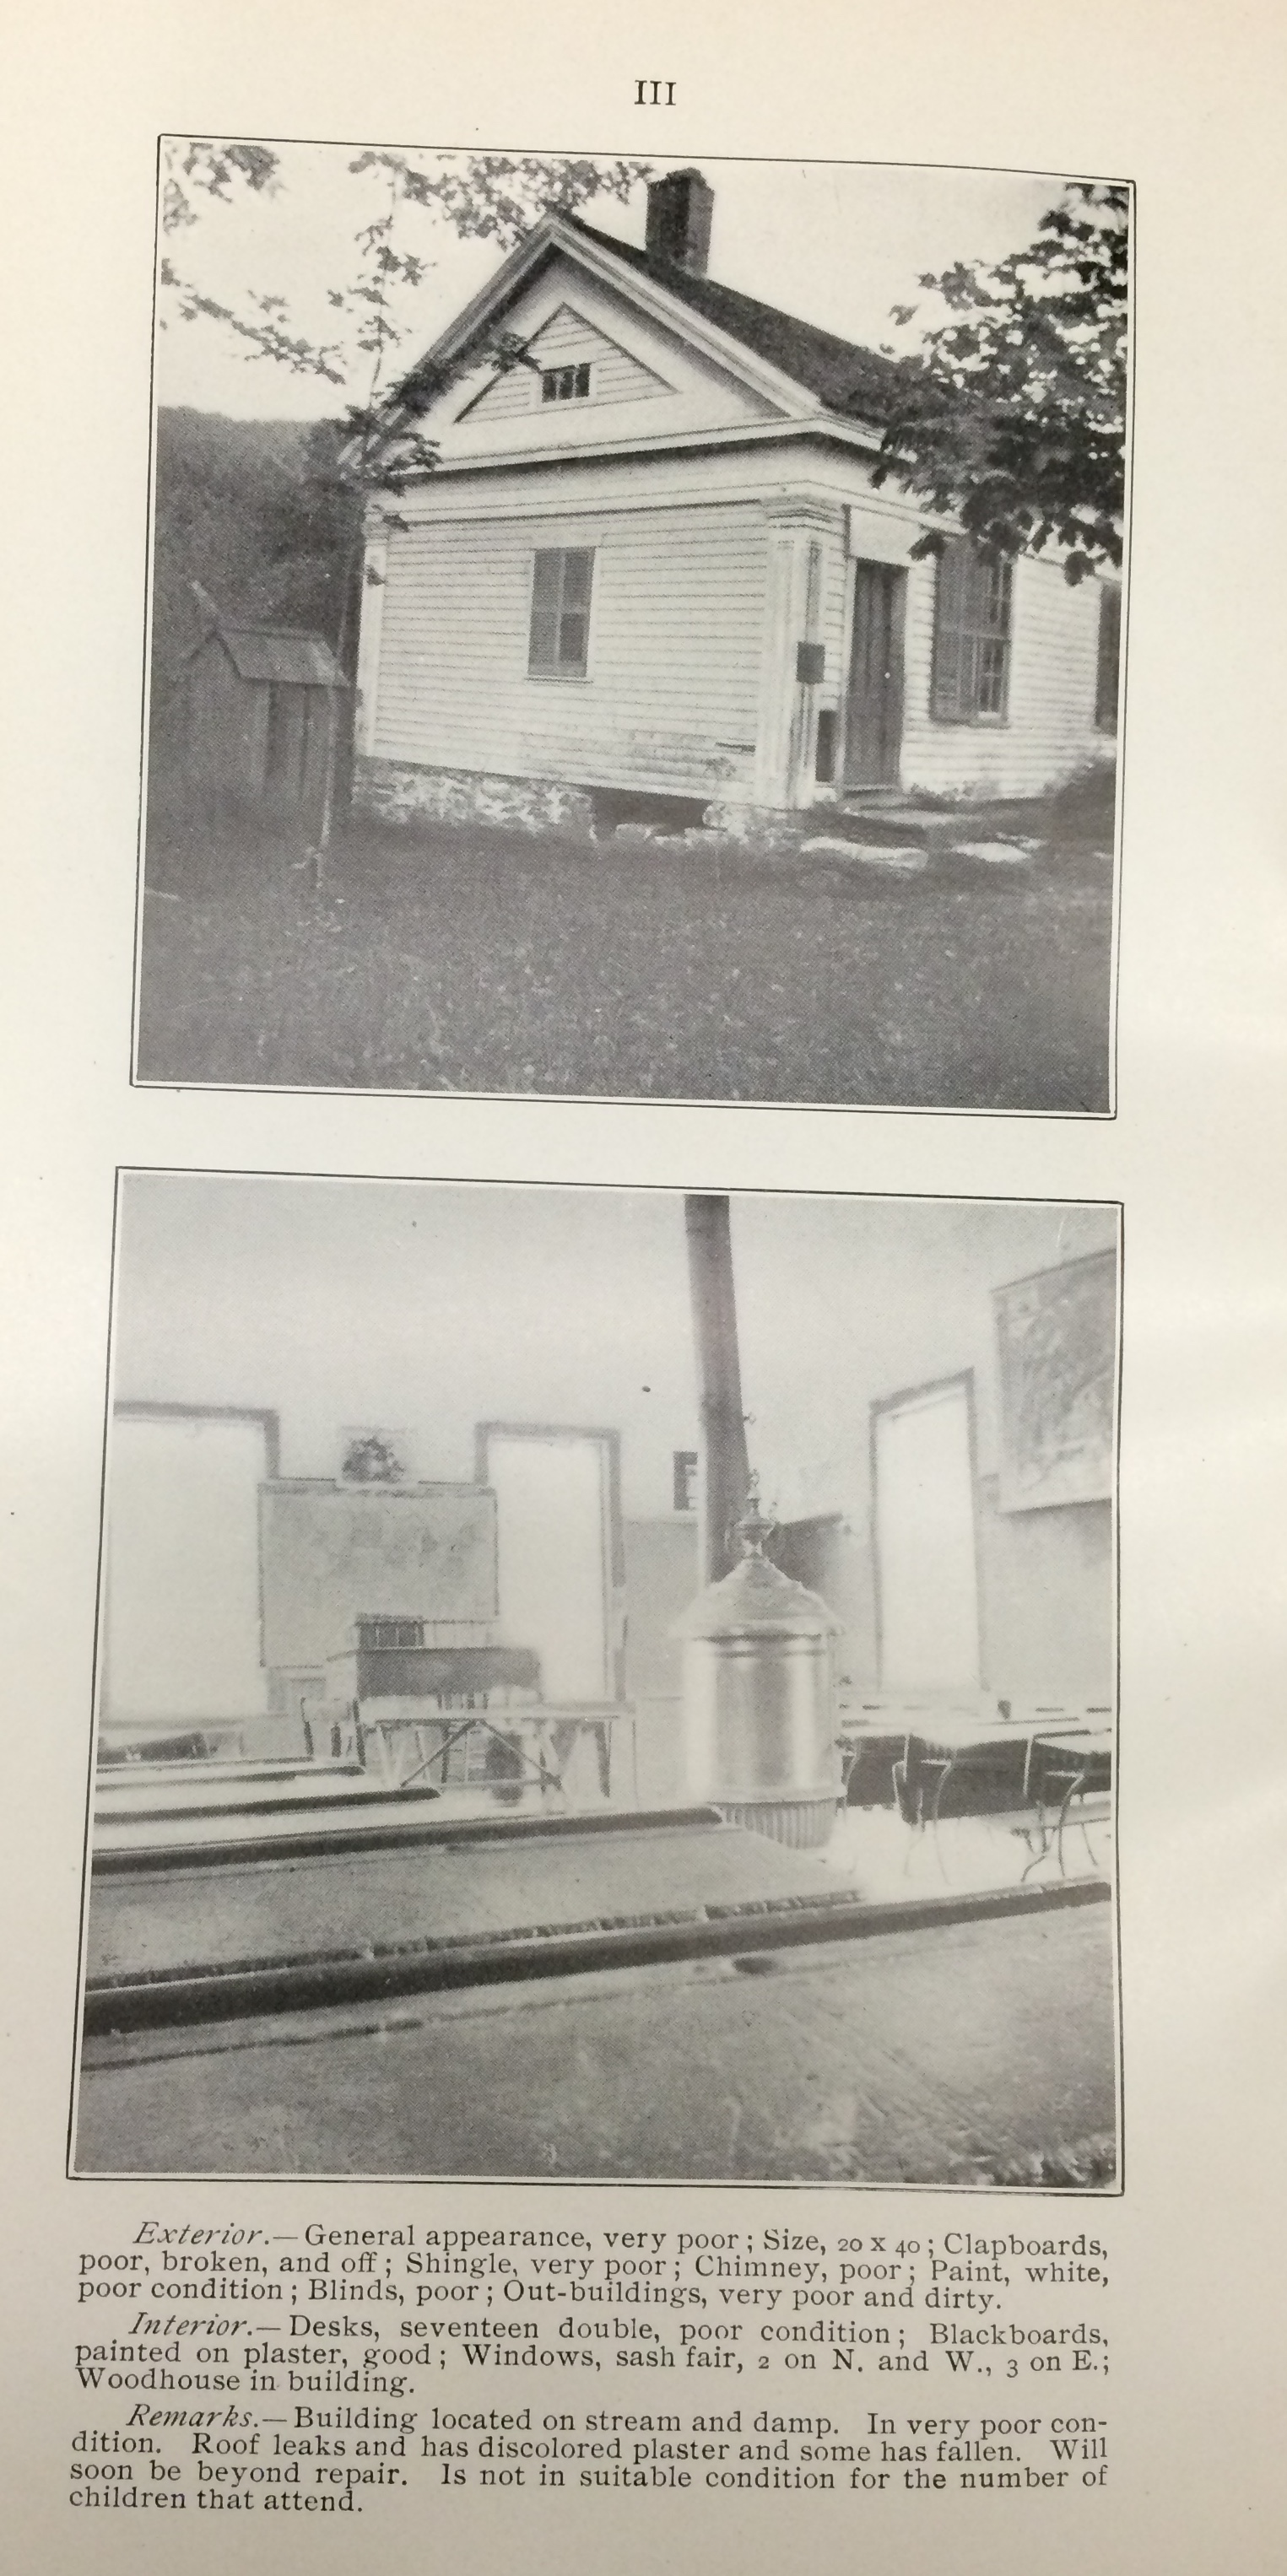 The Connecticut State Board of Education shamed towns by printing photos of low-quality one-room rural schools in its 1901 report.